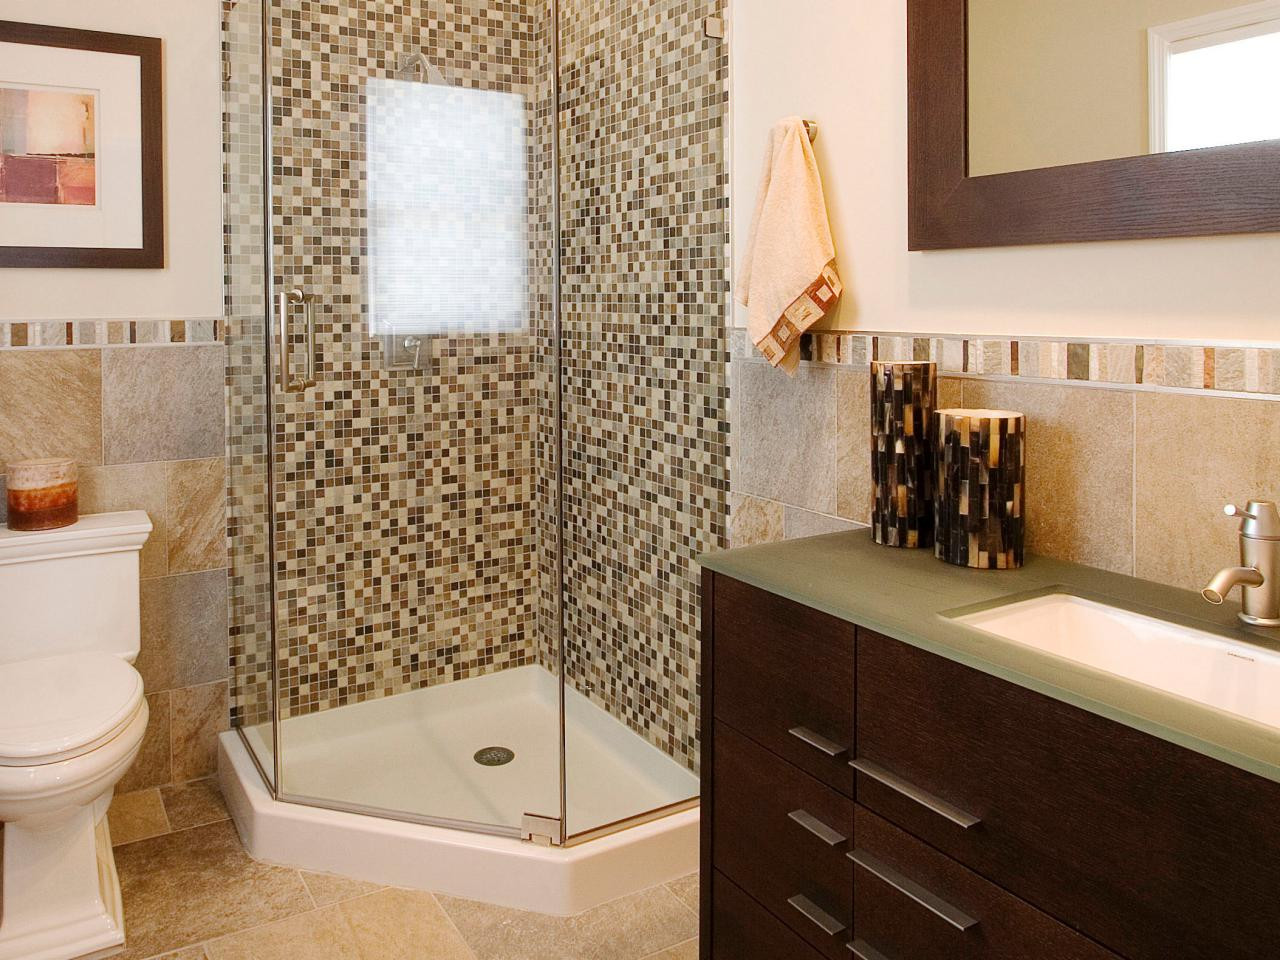 Remodel Small Bathroom With Shower
 Tips to Remodel Small Bathroom MidCityEast